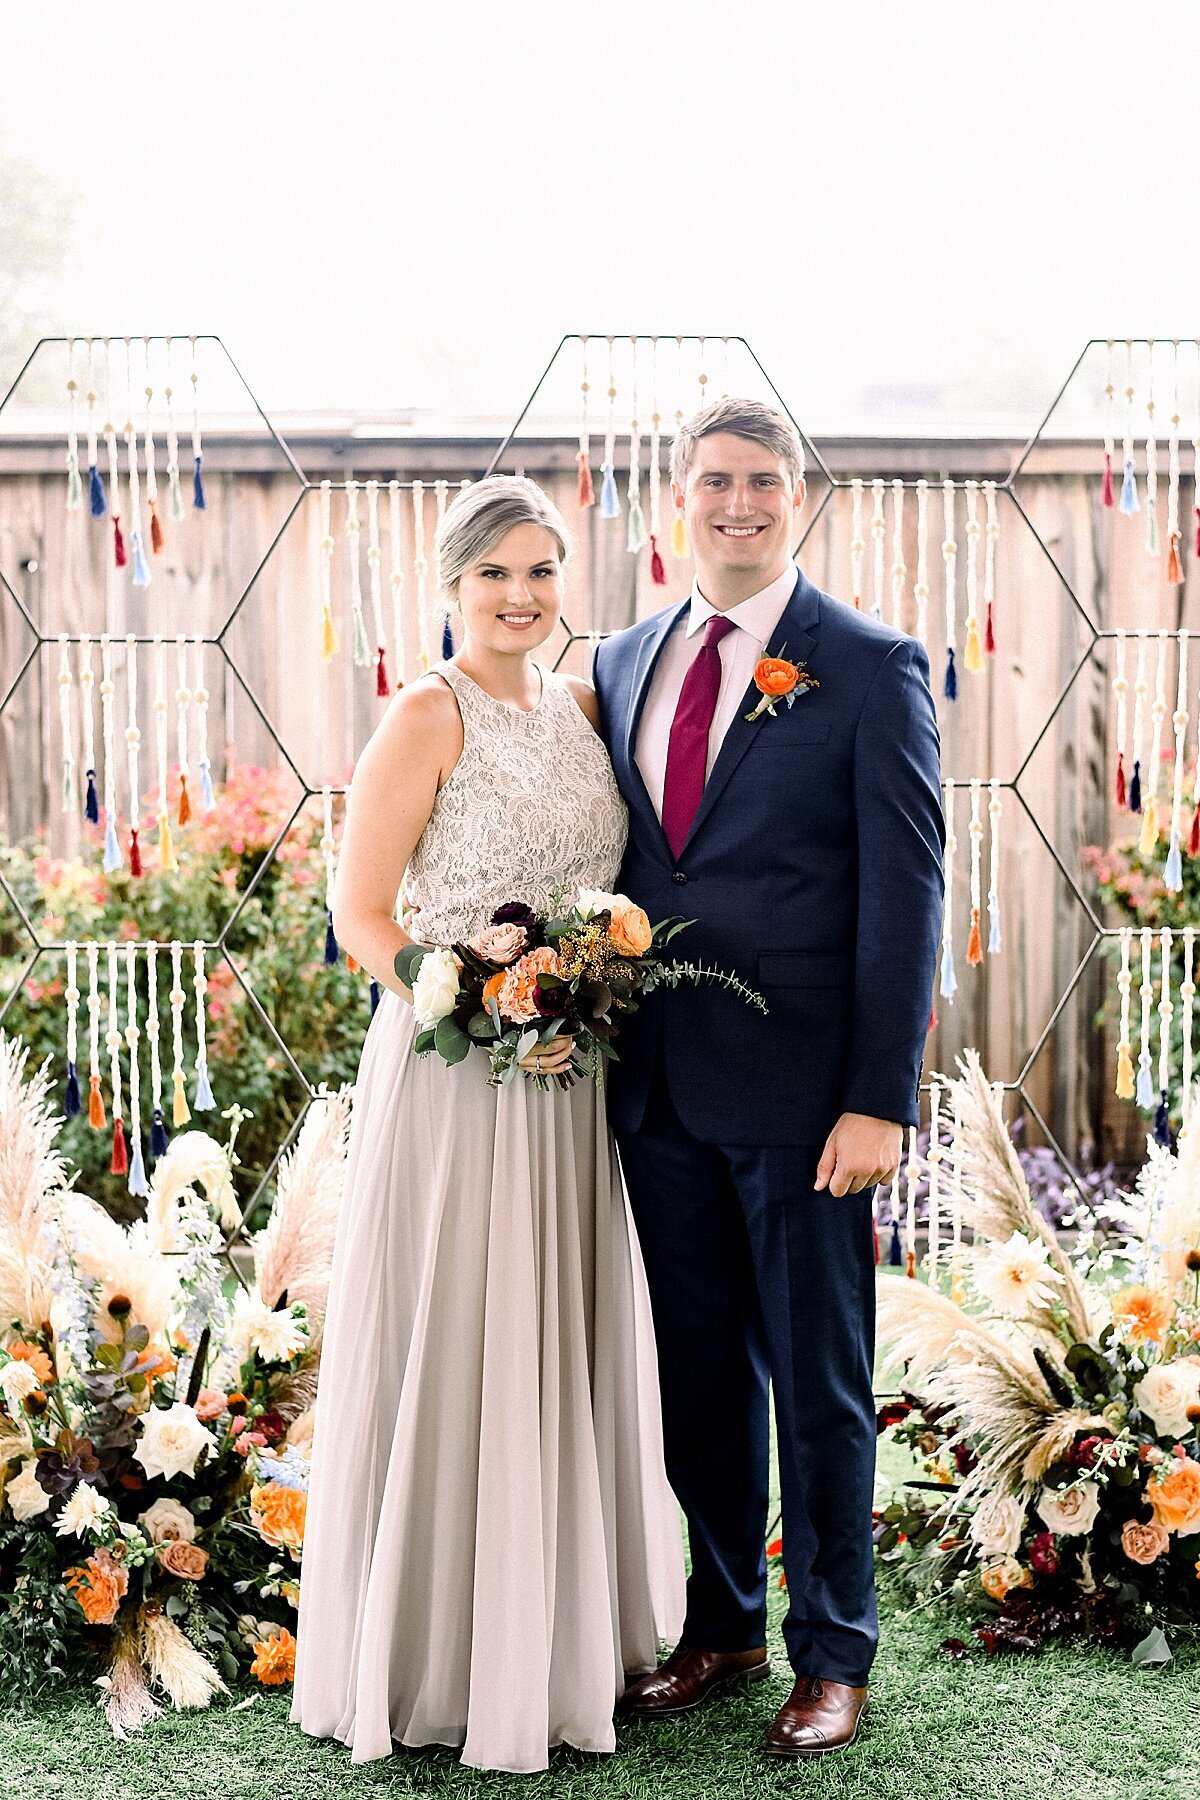 Unique Ceremony Backdrop with Florals by Vella Nest in Dallas Fort Worth